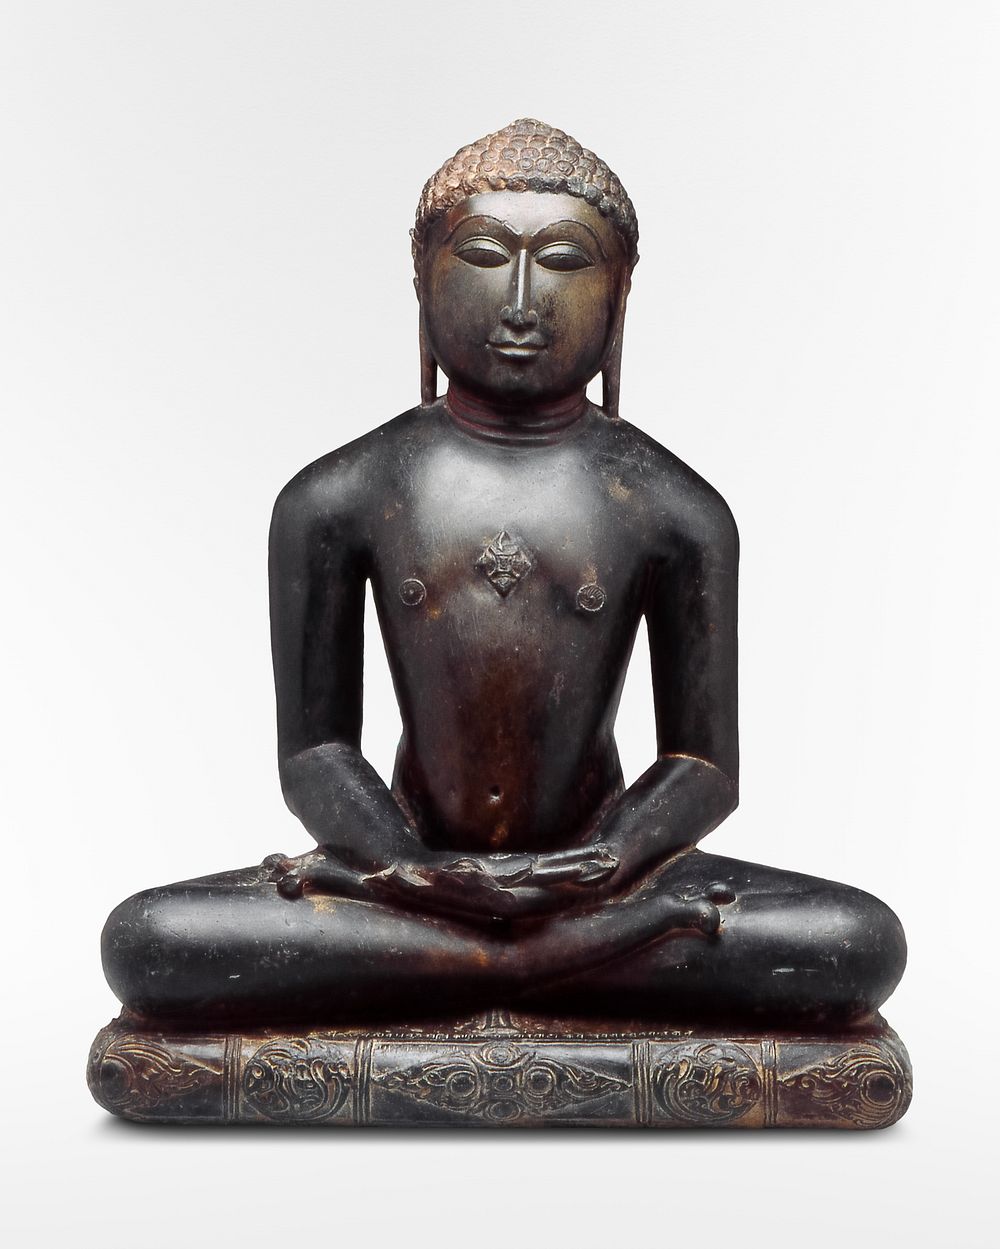 Seated Jina (1108). Original public domain image from The Minneapolis Institute of Art. Digitally enhanced by rawpixel.